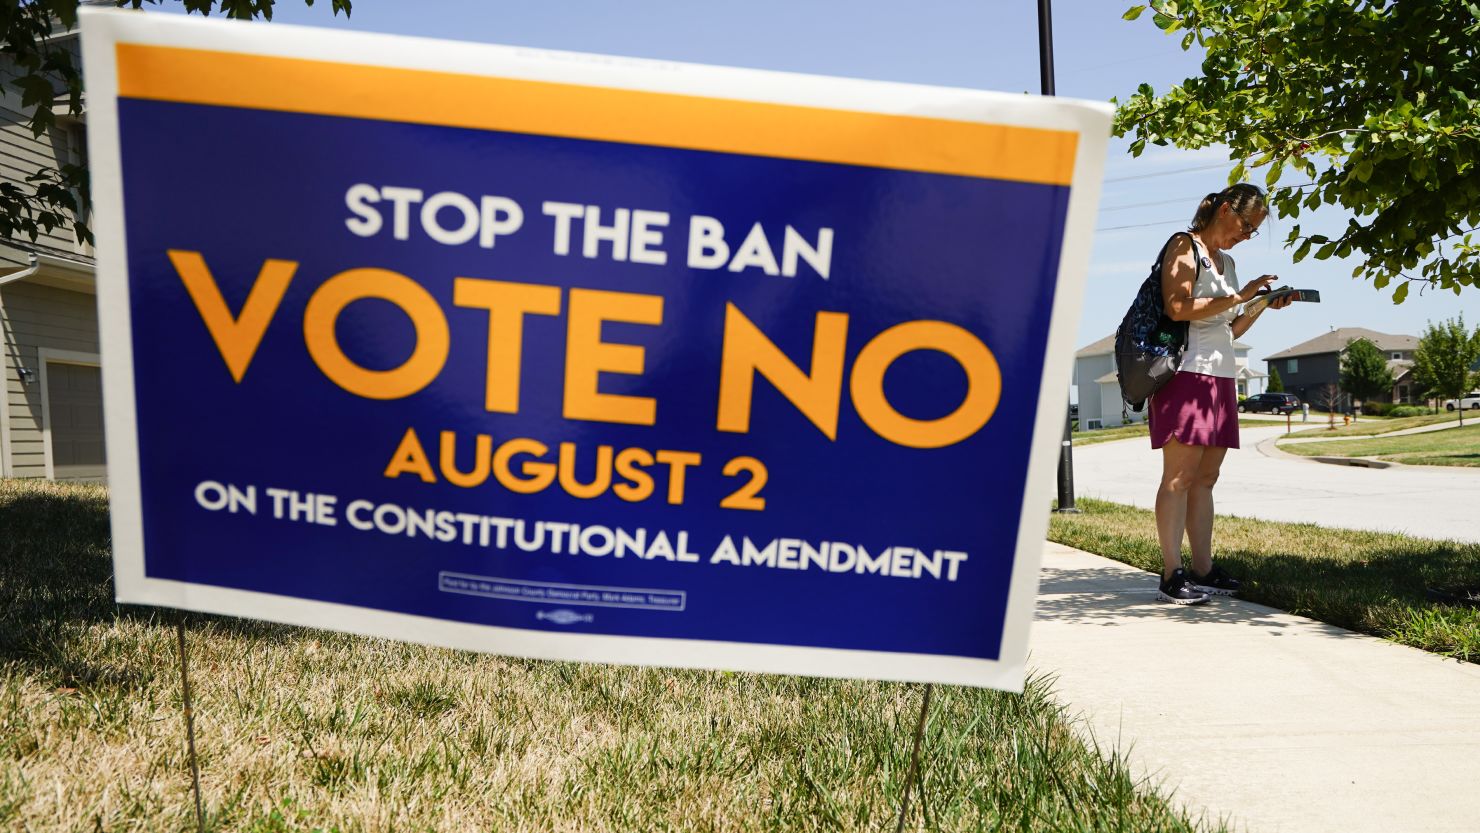 Erin Woods for the Vote No on the Constitutional Amendment on Abortion canvases a neighborhood on August 01, 2022 in Lenexa, Kansas. 